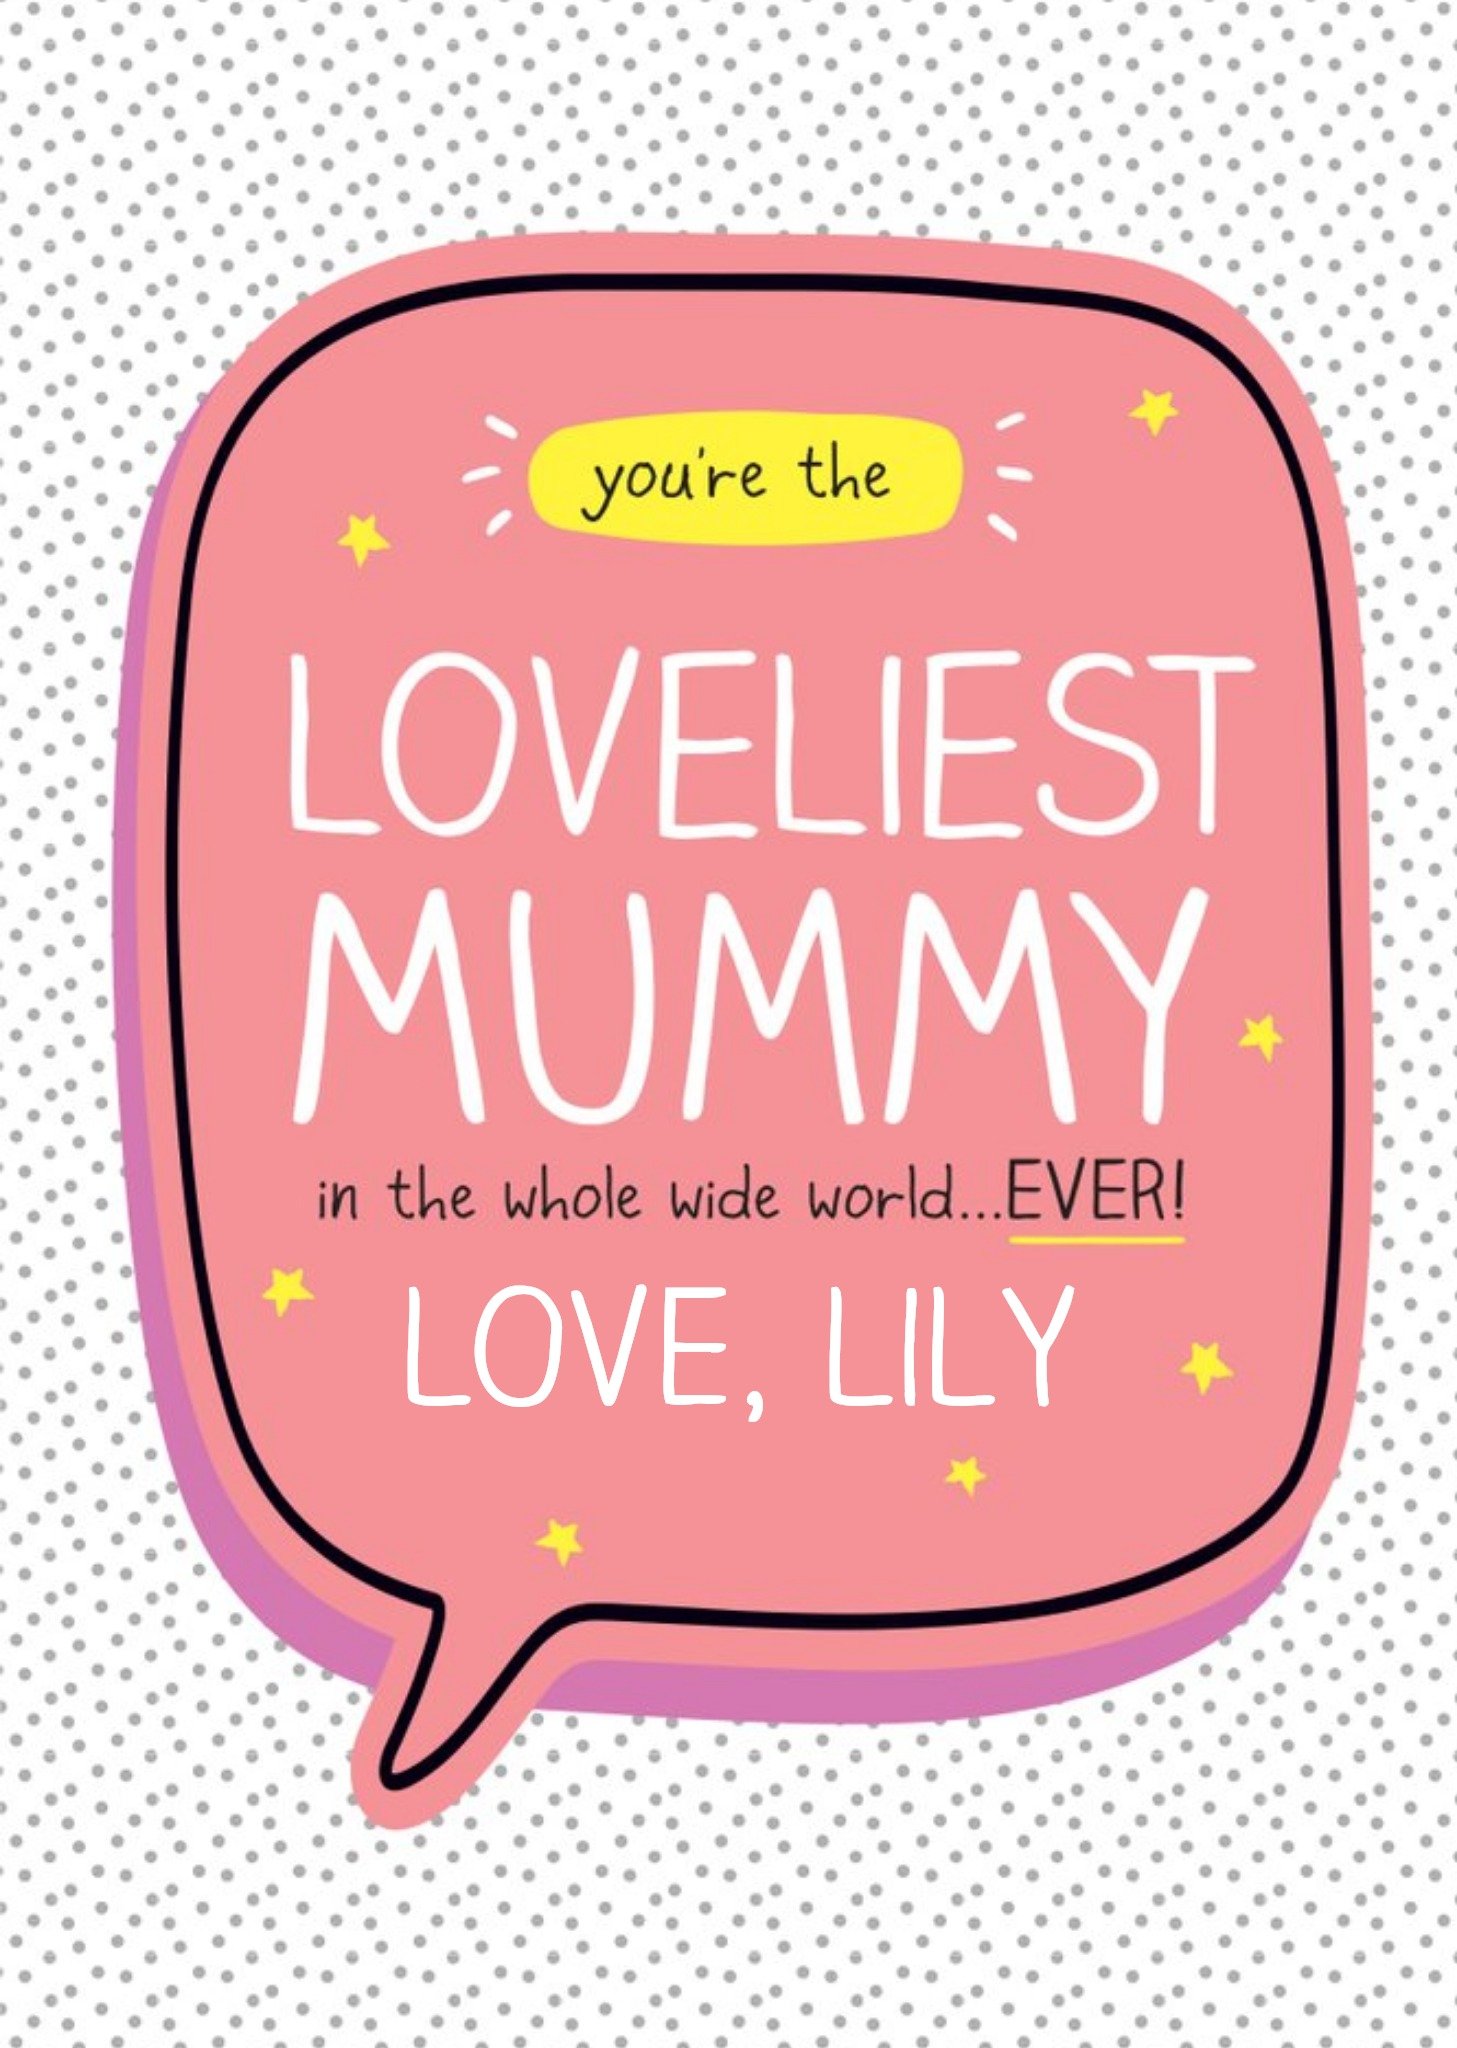 Happy Jackson Lovliest Mummy In The World Wide World Mother's Day Card Ecard